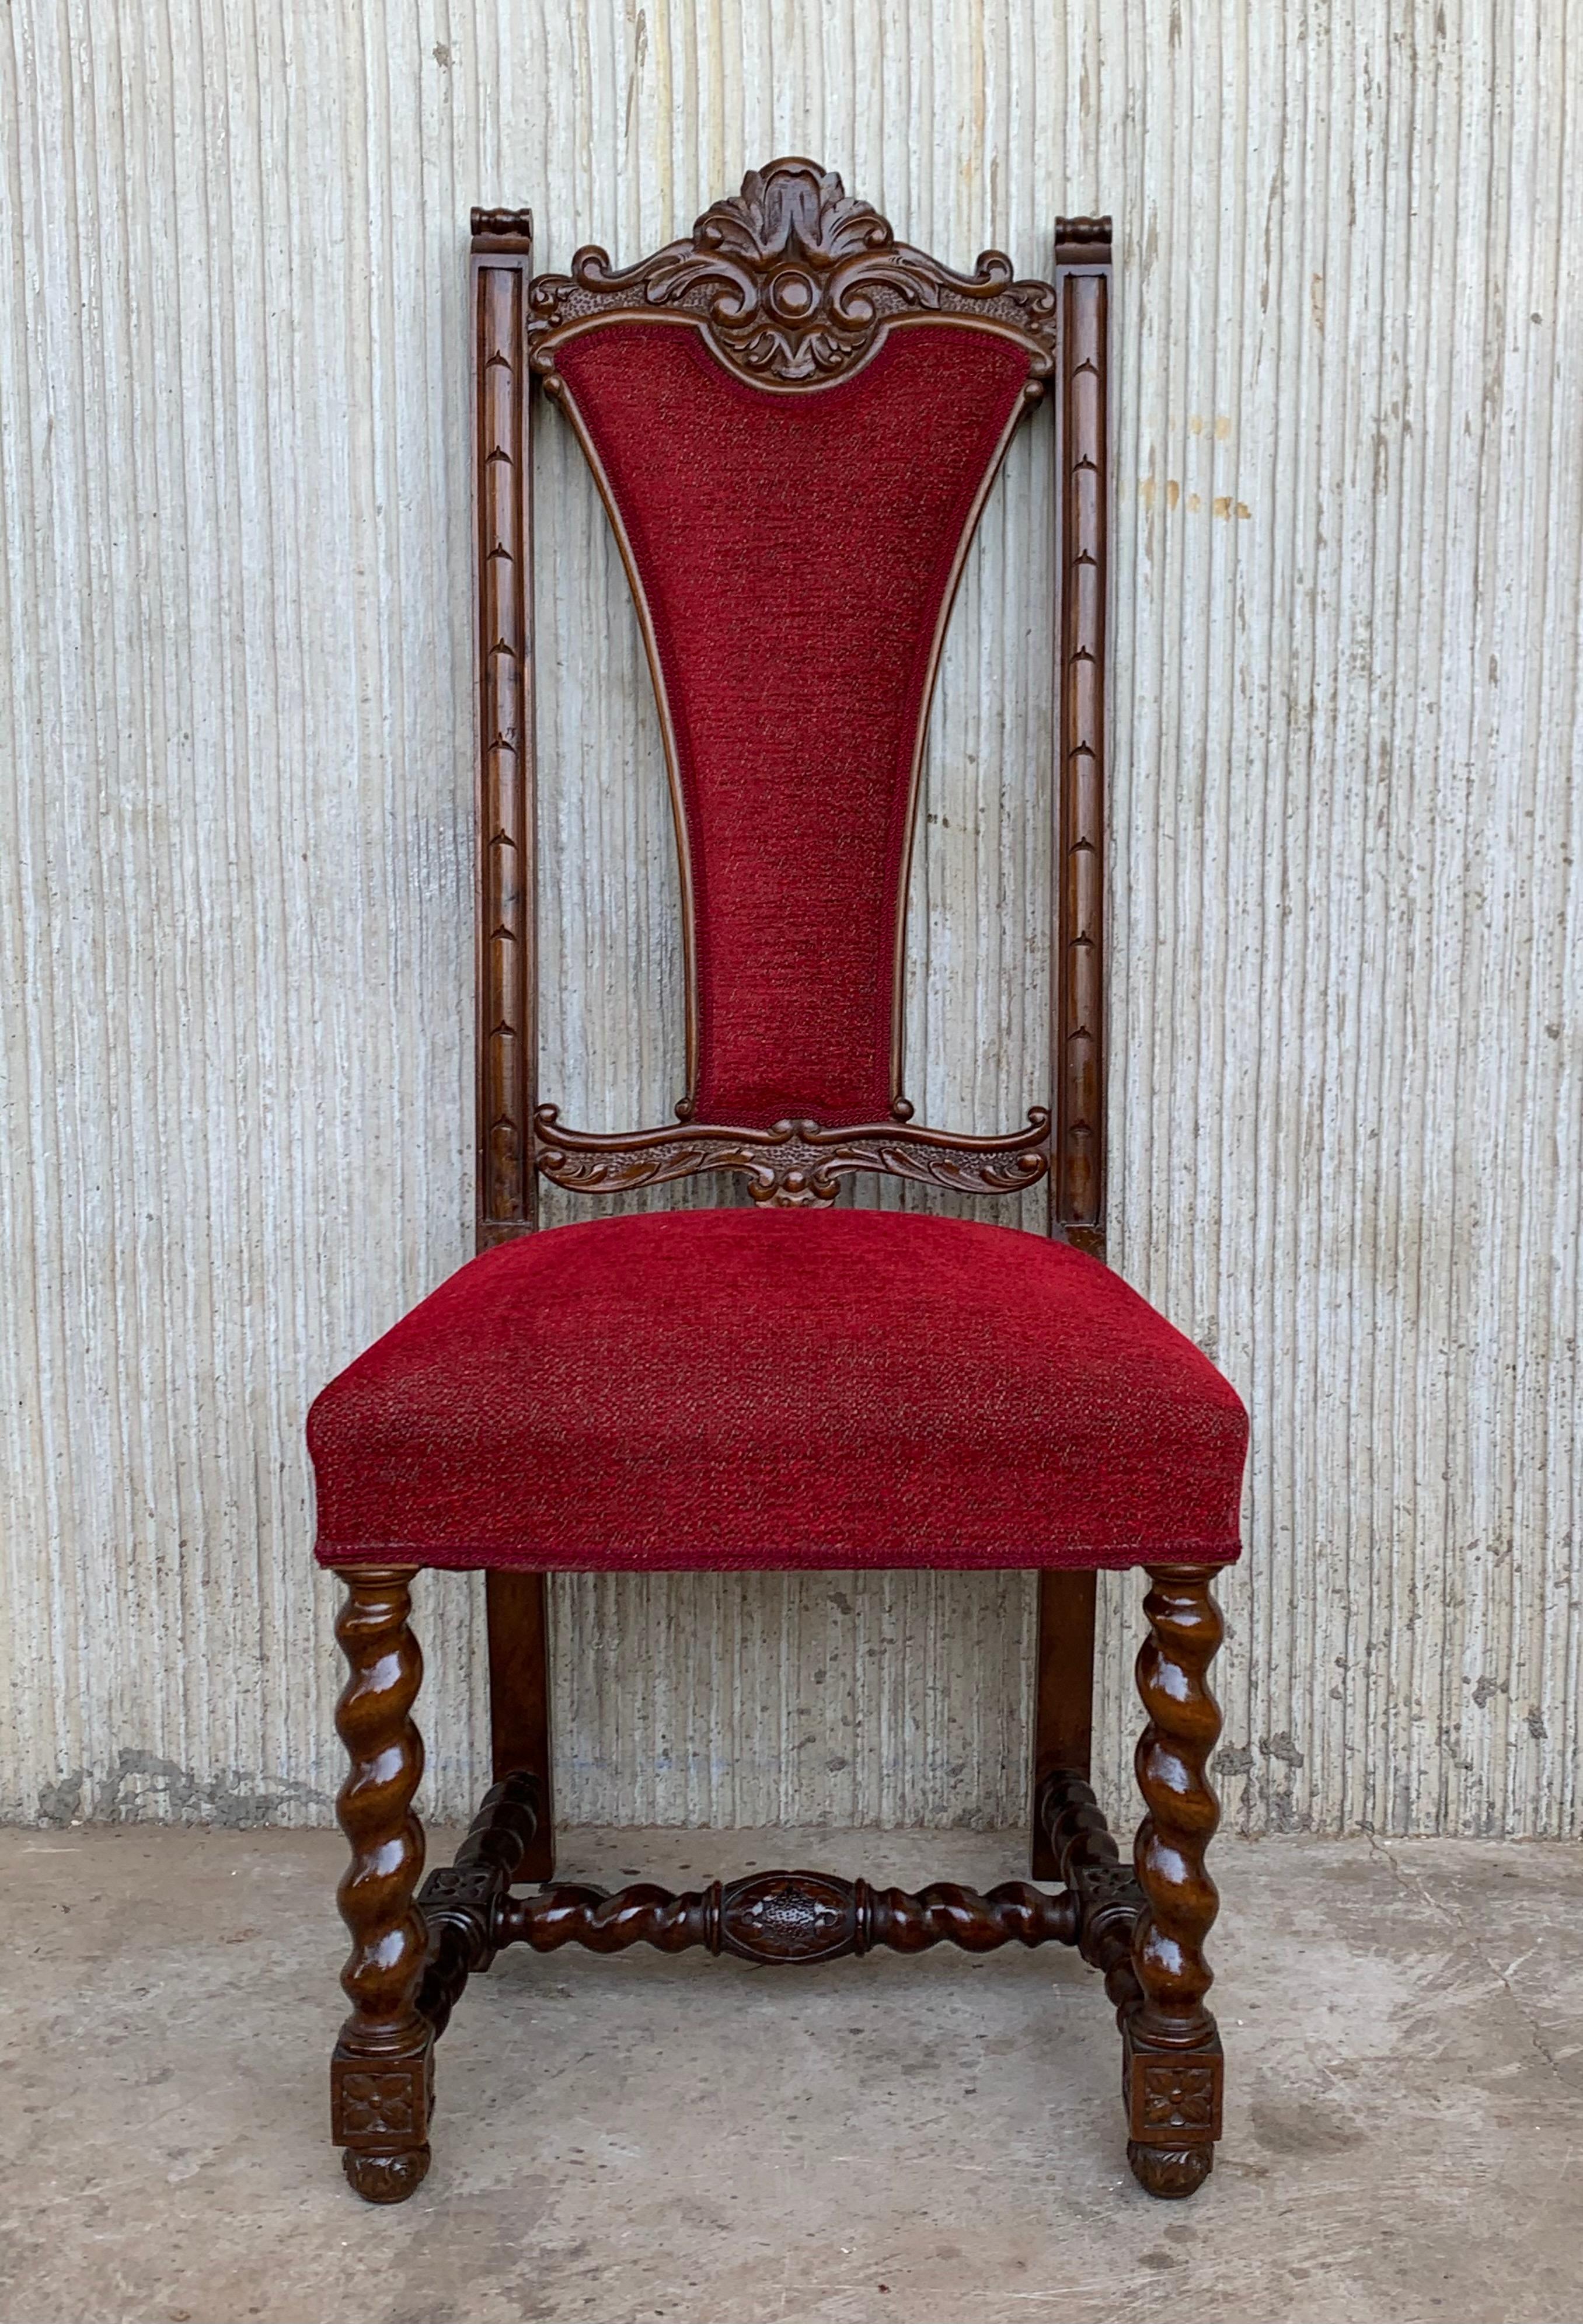 Spanish carved walnut set of six chairs with red velvet seat and back
Beautiful set of chairs, very heavy and resistant with carved crest in the back and beautiful Solomonic legs with Solomonic stretcher. The seat and back are original of this